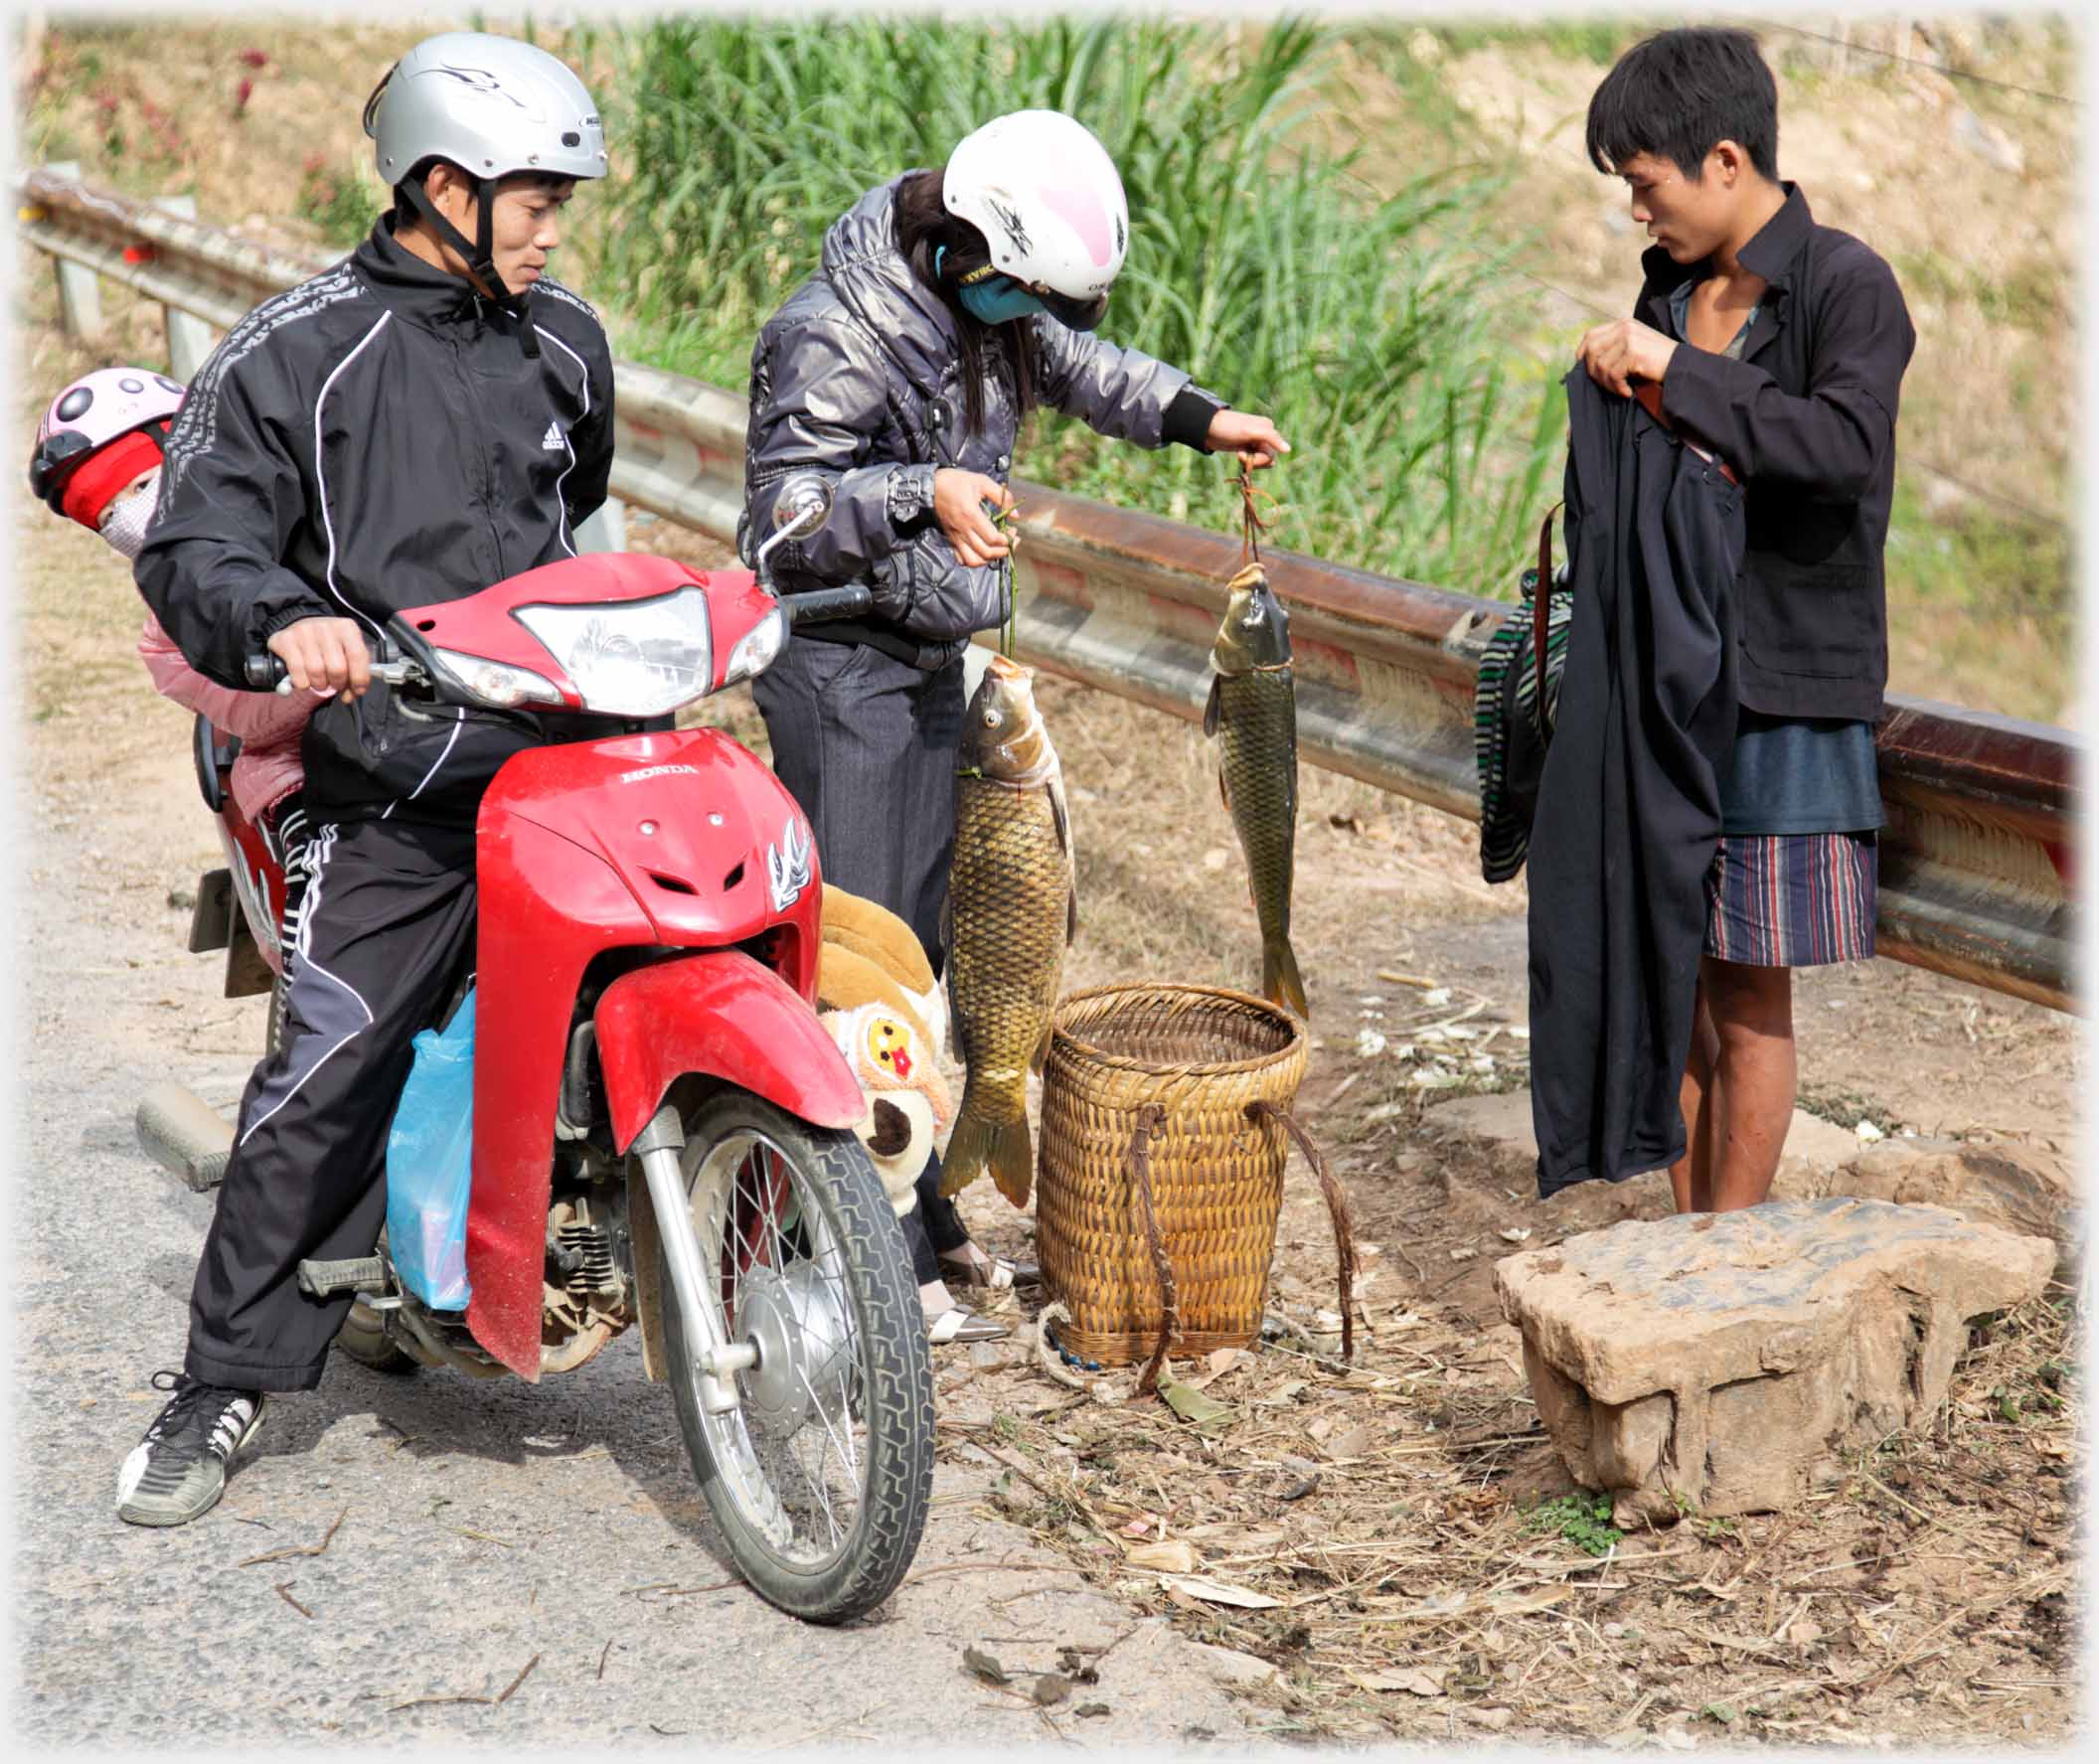 Man standing holding trousers, woman from motorbike holding two large fish.